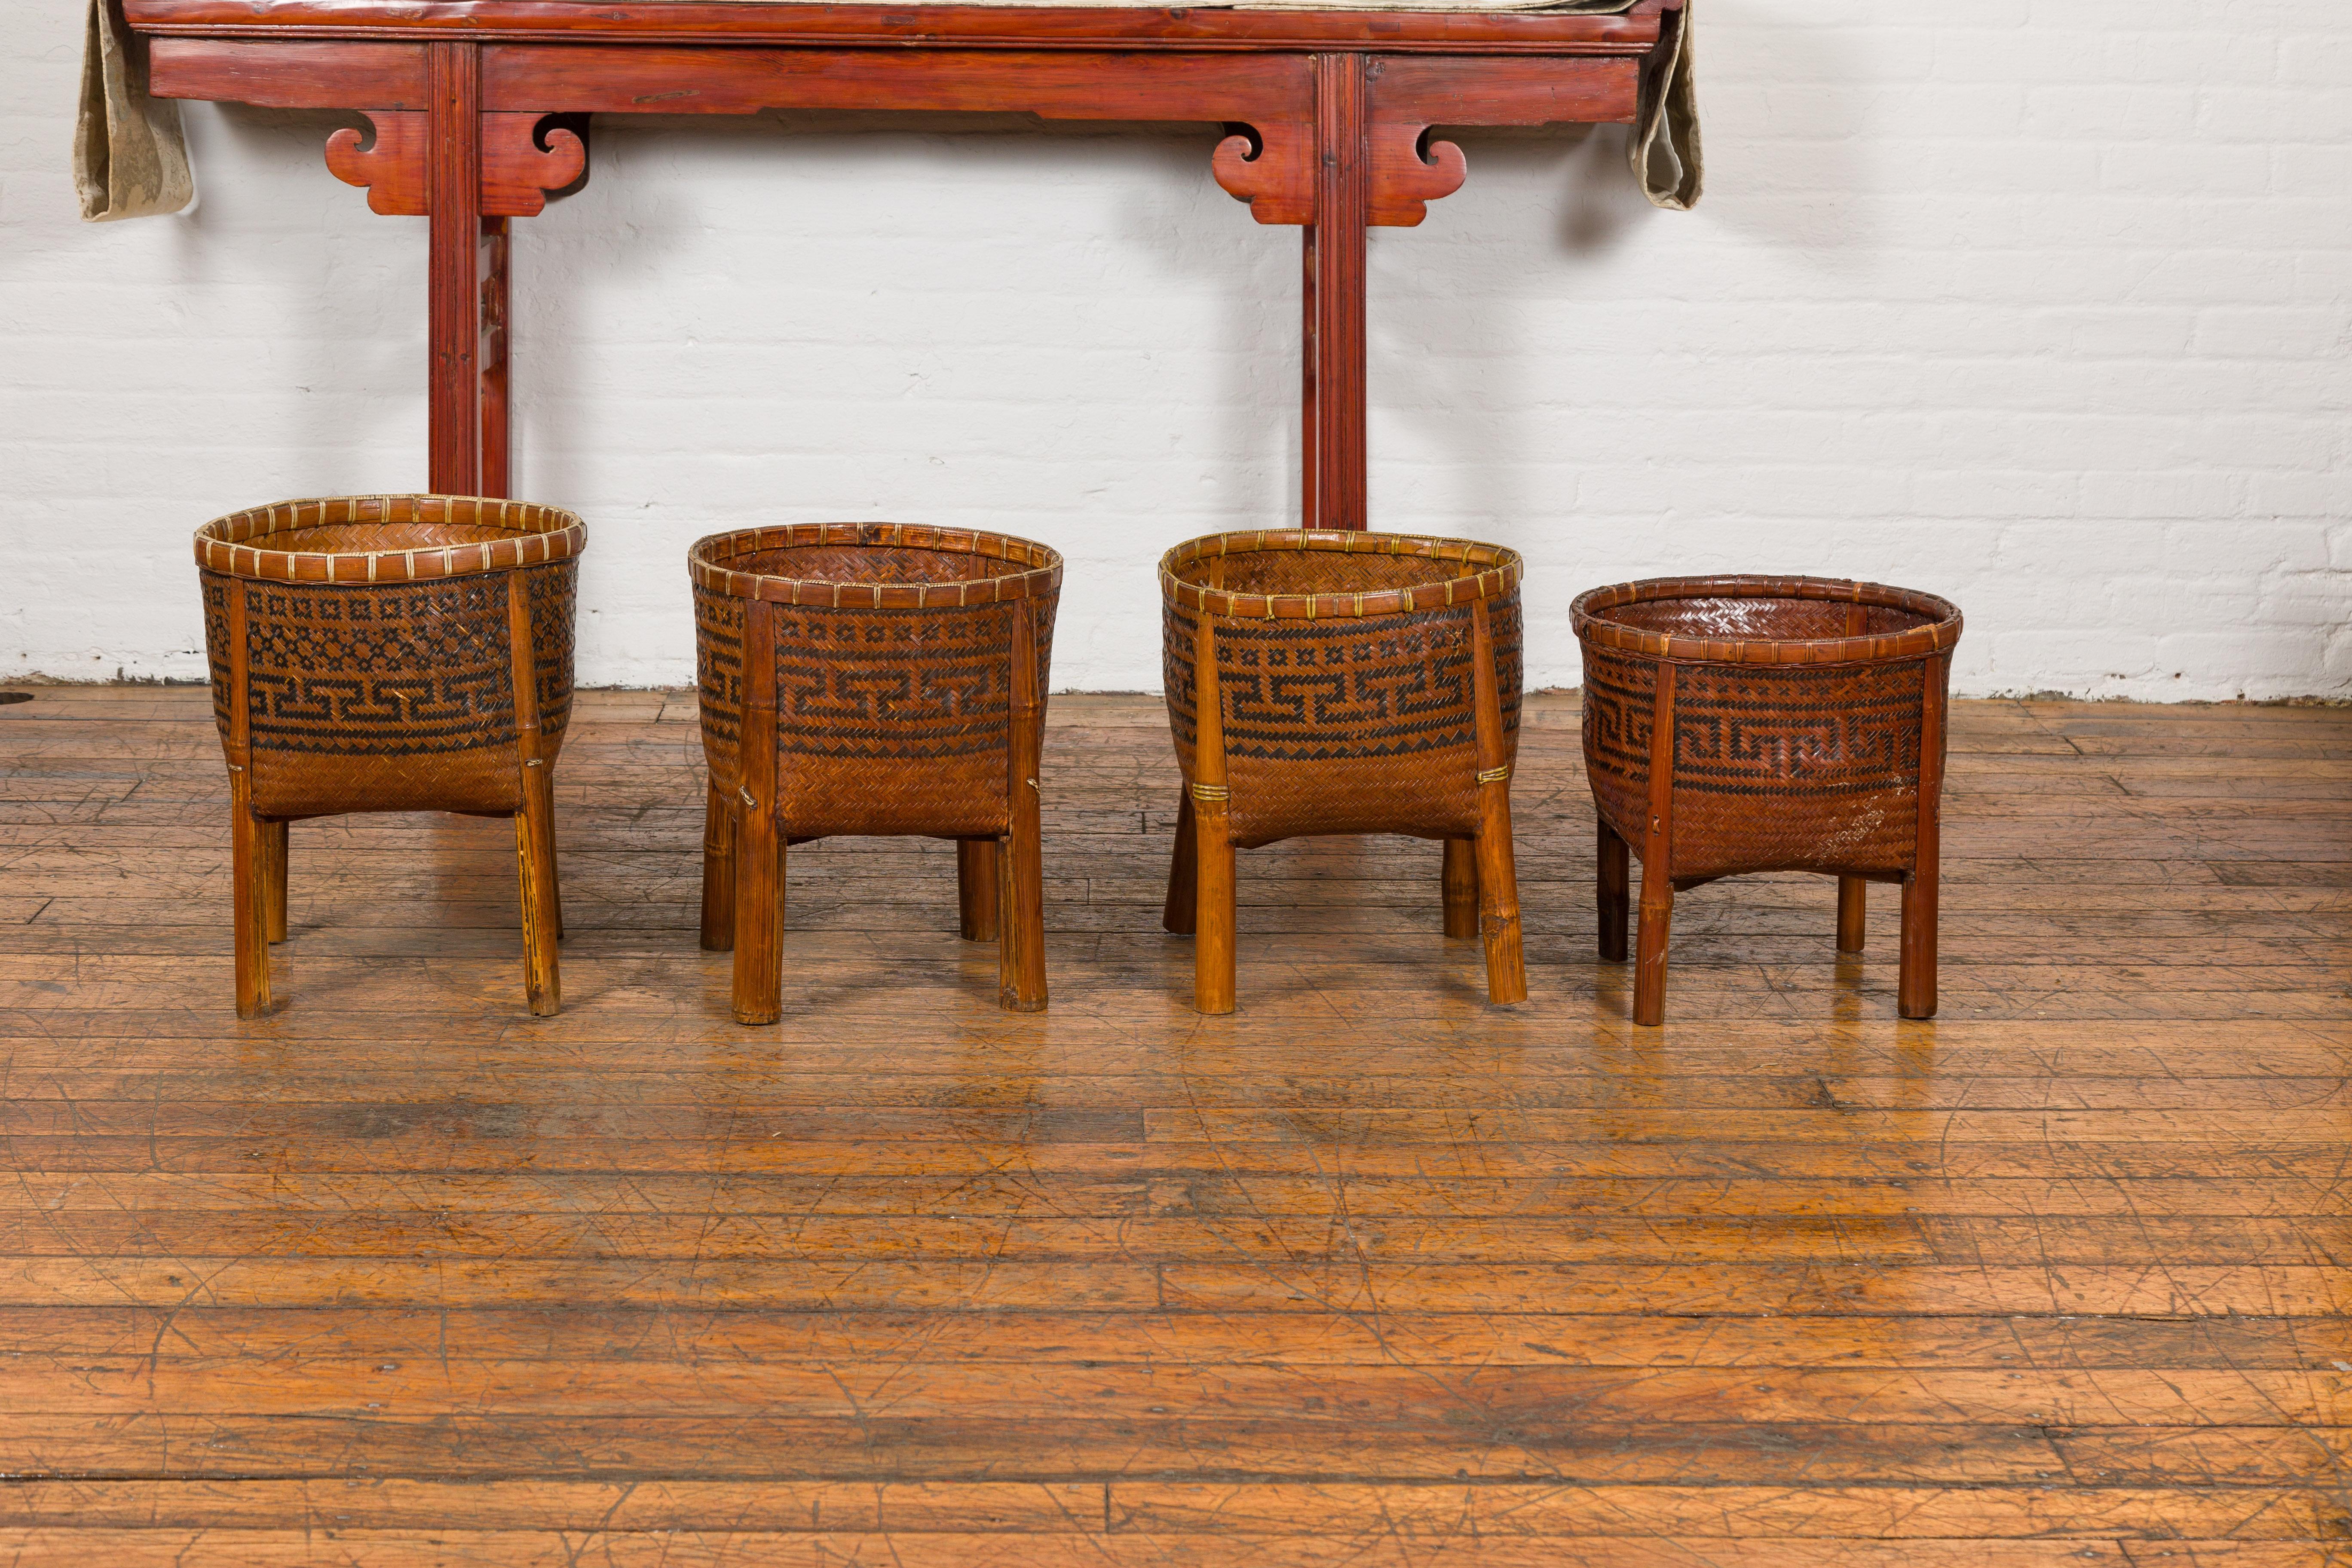 Old woven rattan rustic Chinese baskets on wooden legs, with Greek key friezes. Imbued with rustic charm and historic elegance, these vintage Chinese baskets are charming artifacts from a bygone era. Handwoven from sturdy rattan, they captivate with